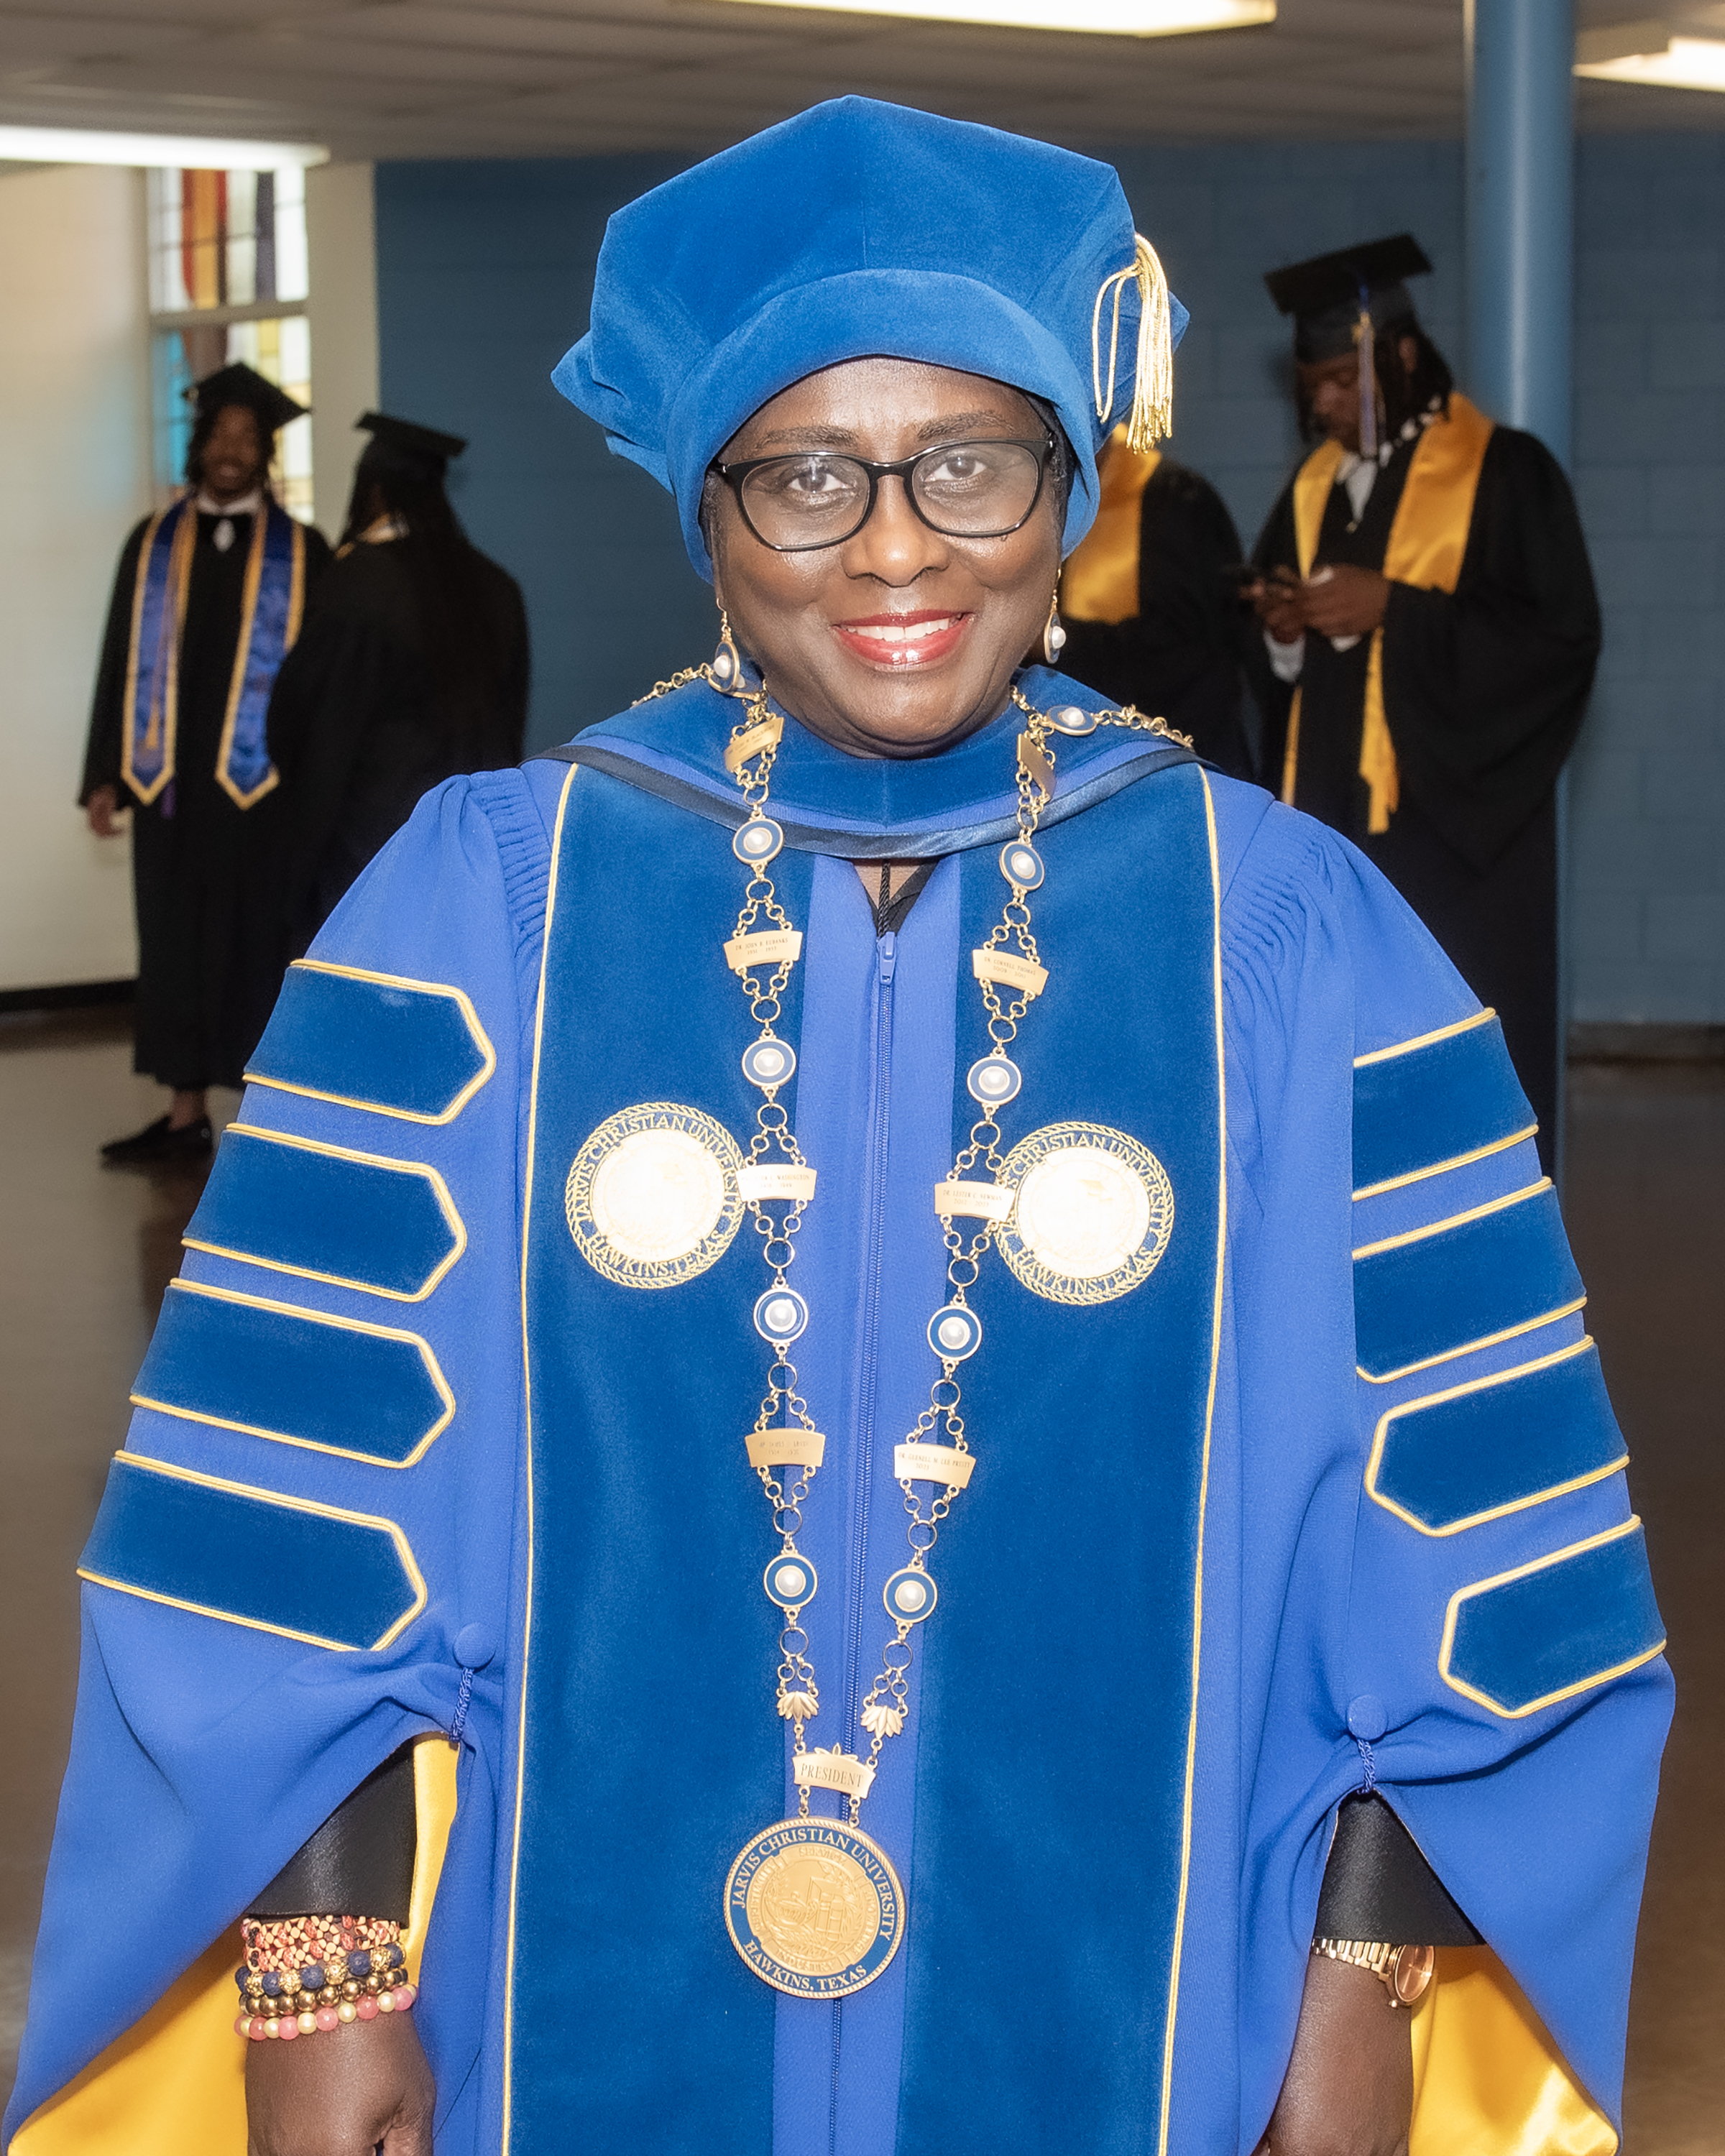 Robed and Ready. JCU President Dr. Glenell M. Lee-Pruitt prepares to take the state. 